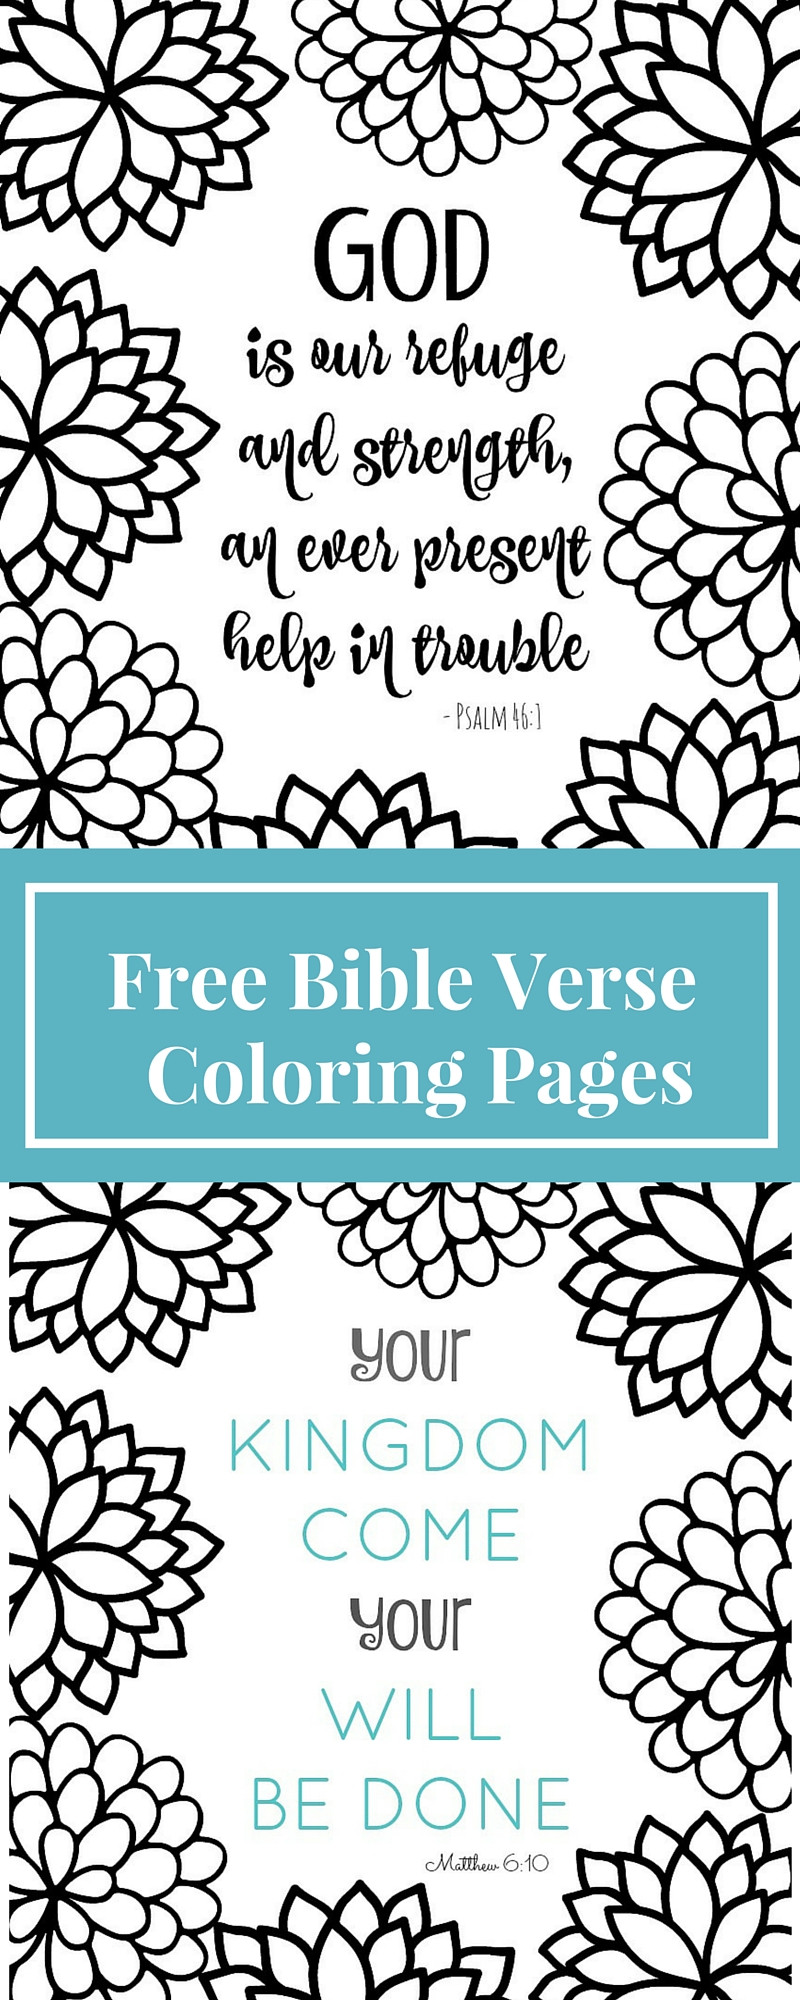 Printable Bible Coloring Pages
 Free Printable Bible Verse Coloring Pages with Bursting